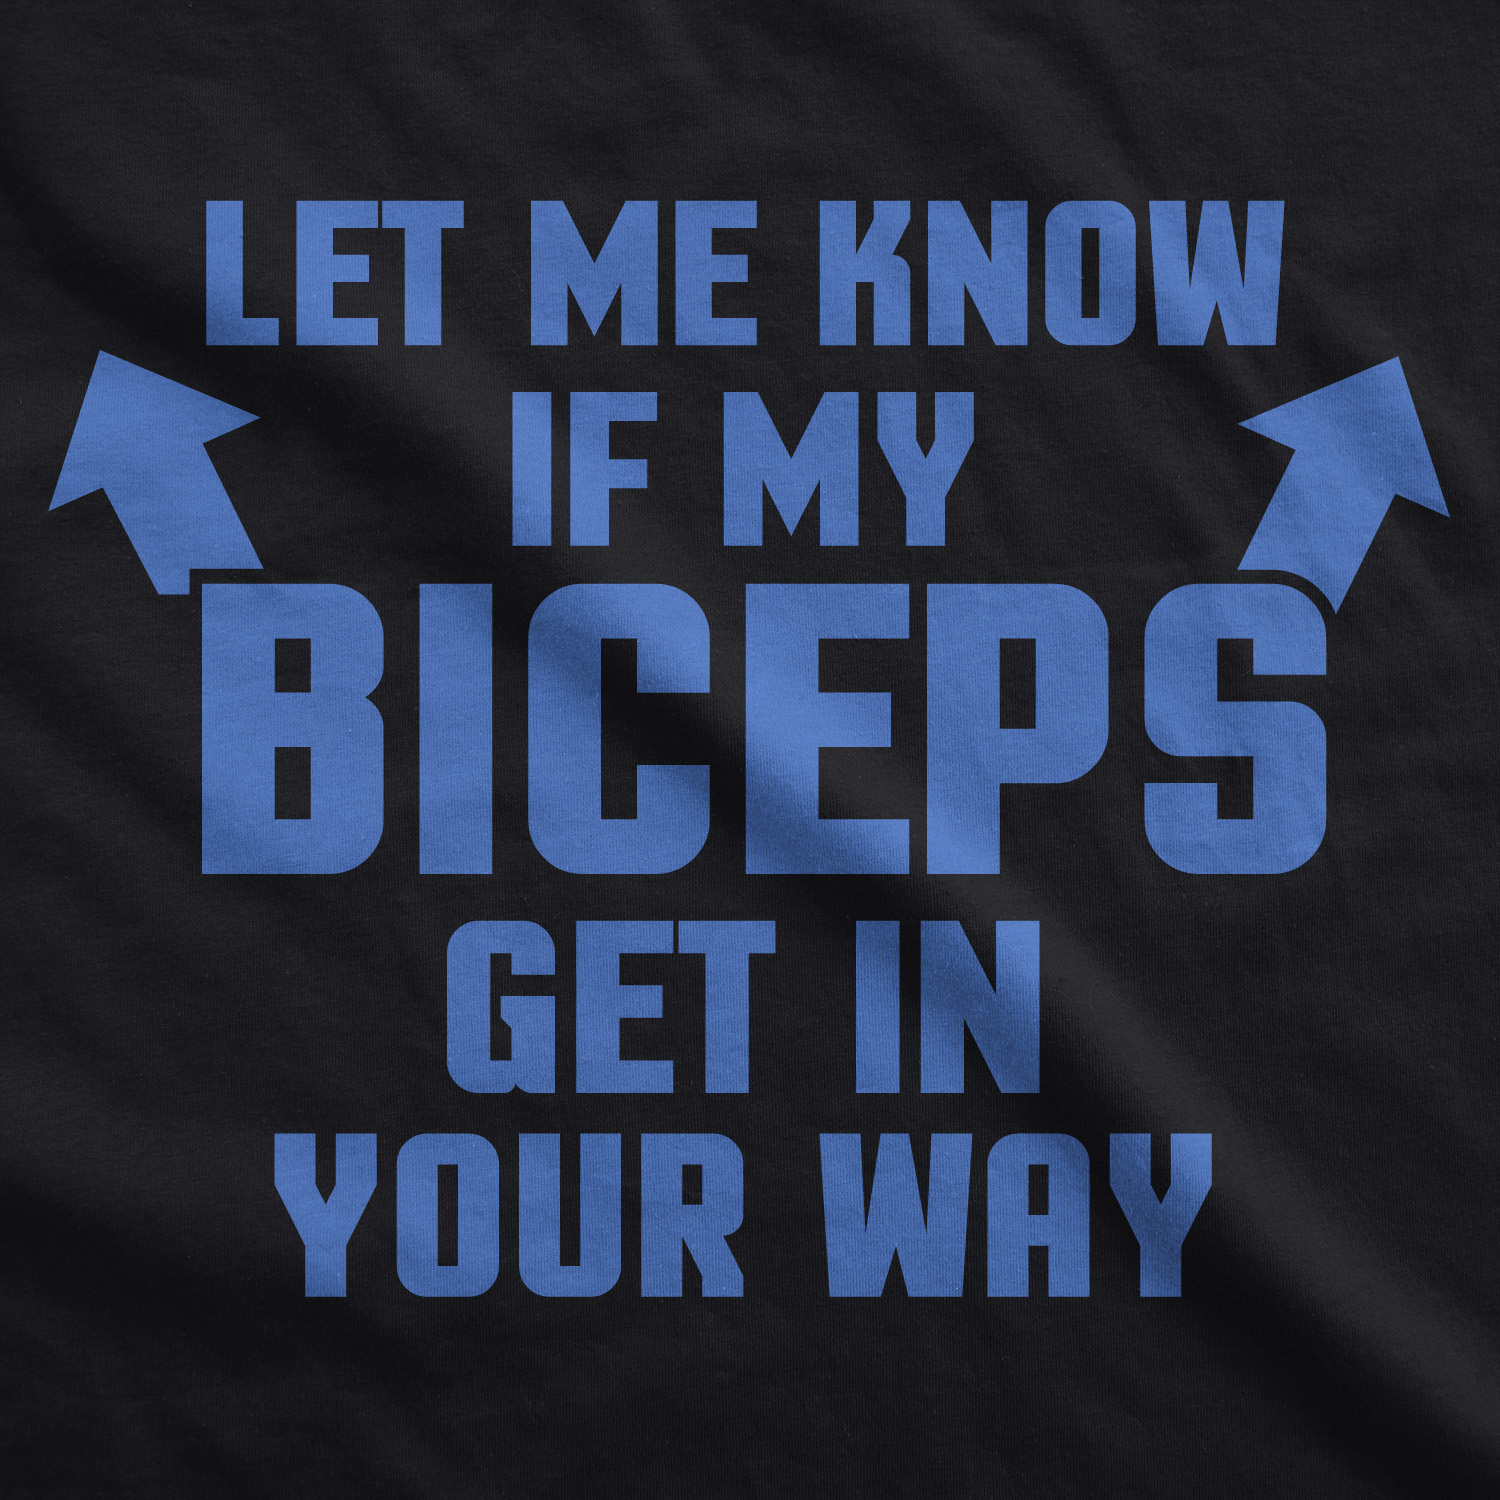 Let Me Know If My Biceps Get In The Way Tank Top Funny Workout Sleeveless Tee - image 2 of 8